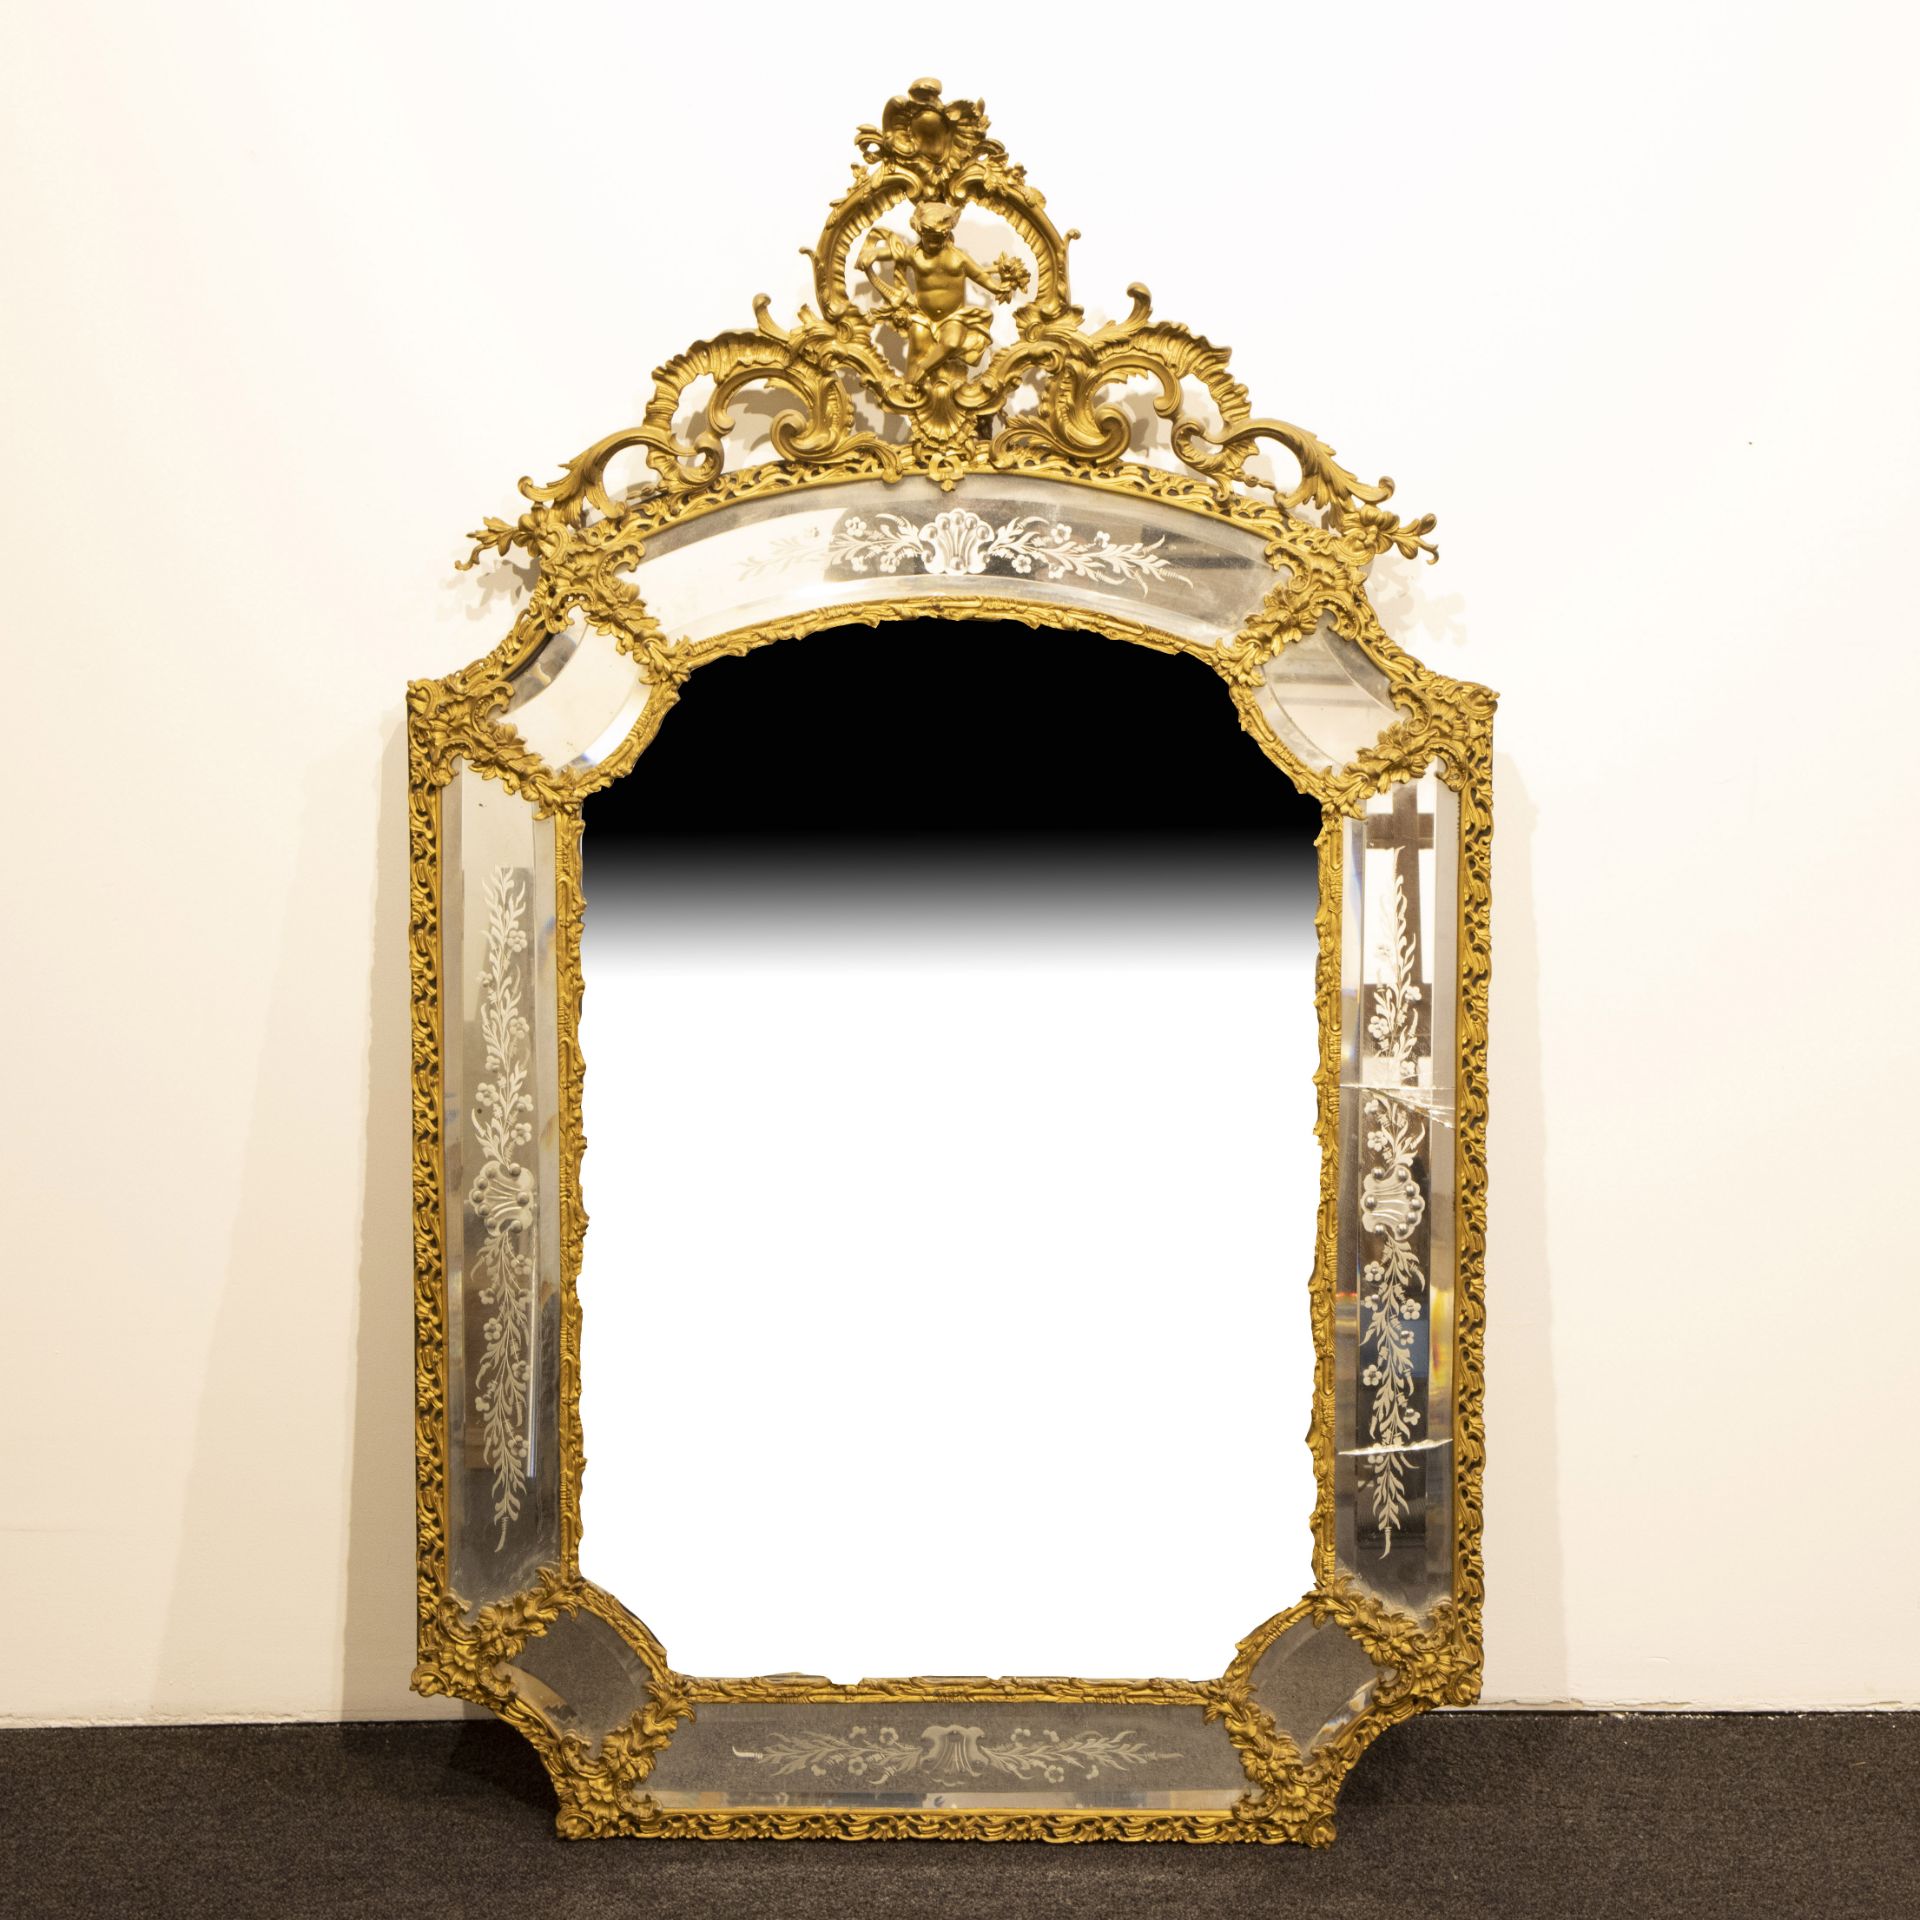 Antique Rococo style bronze mirror with cut glass motifs